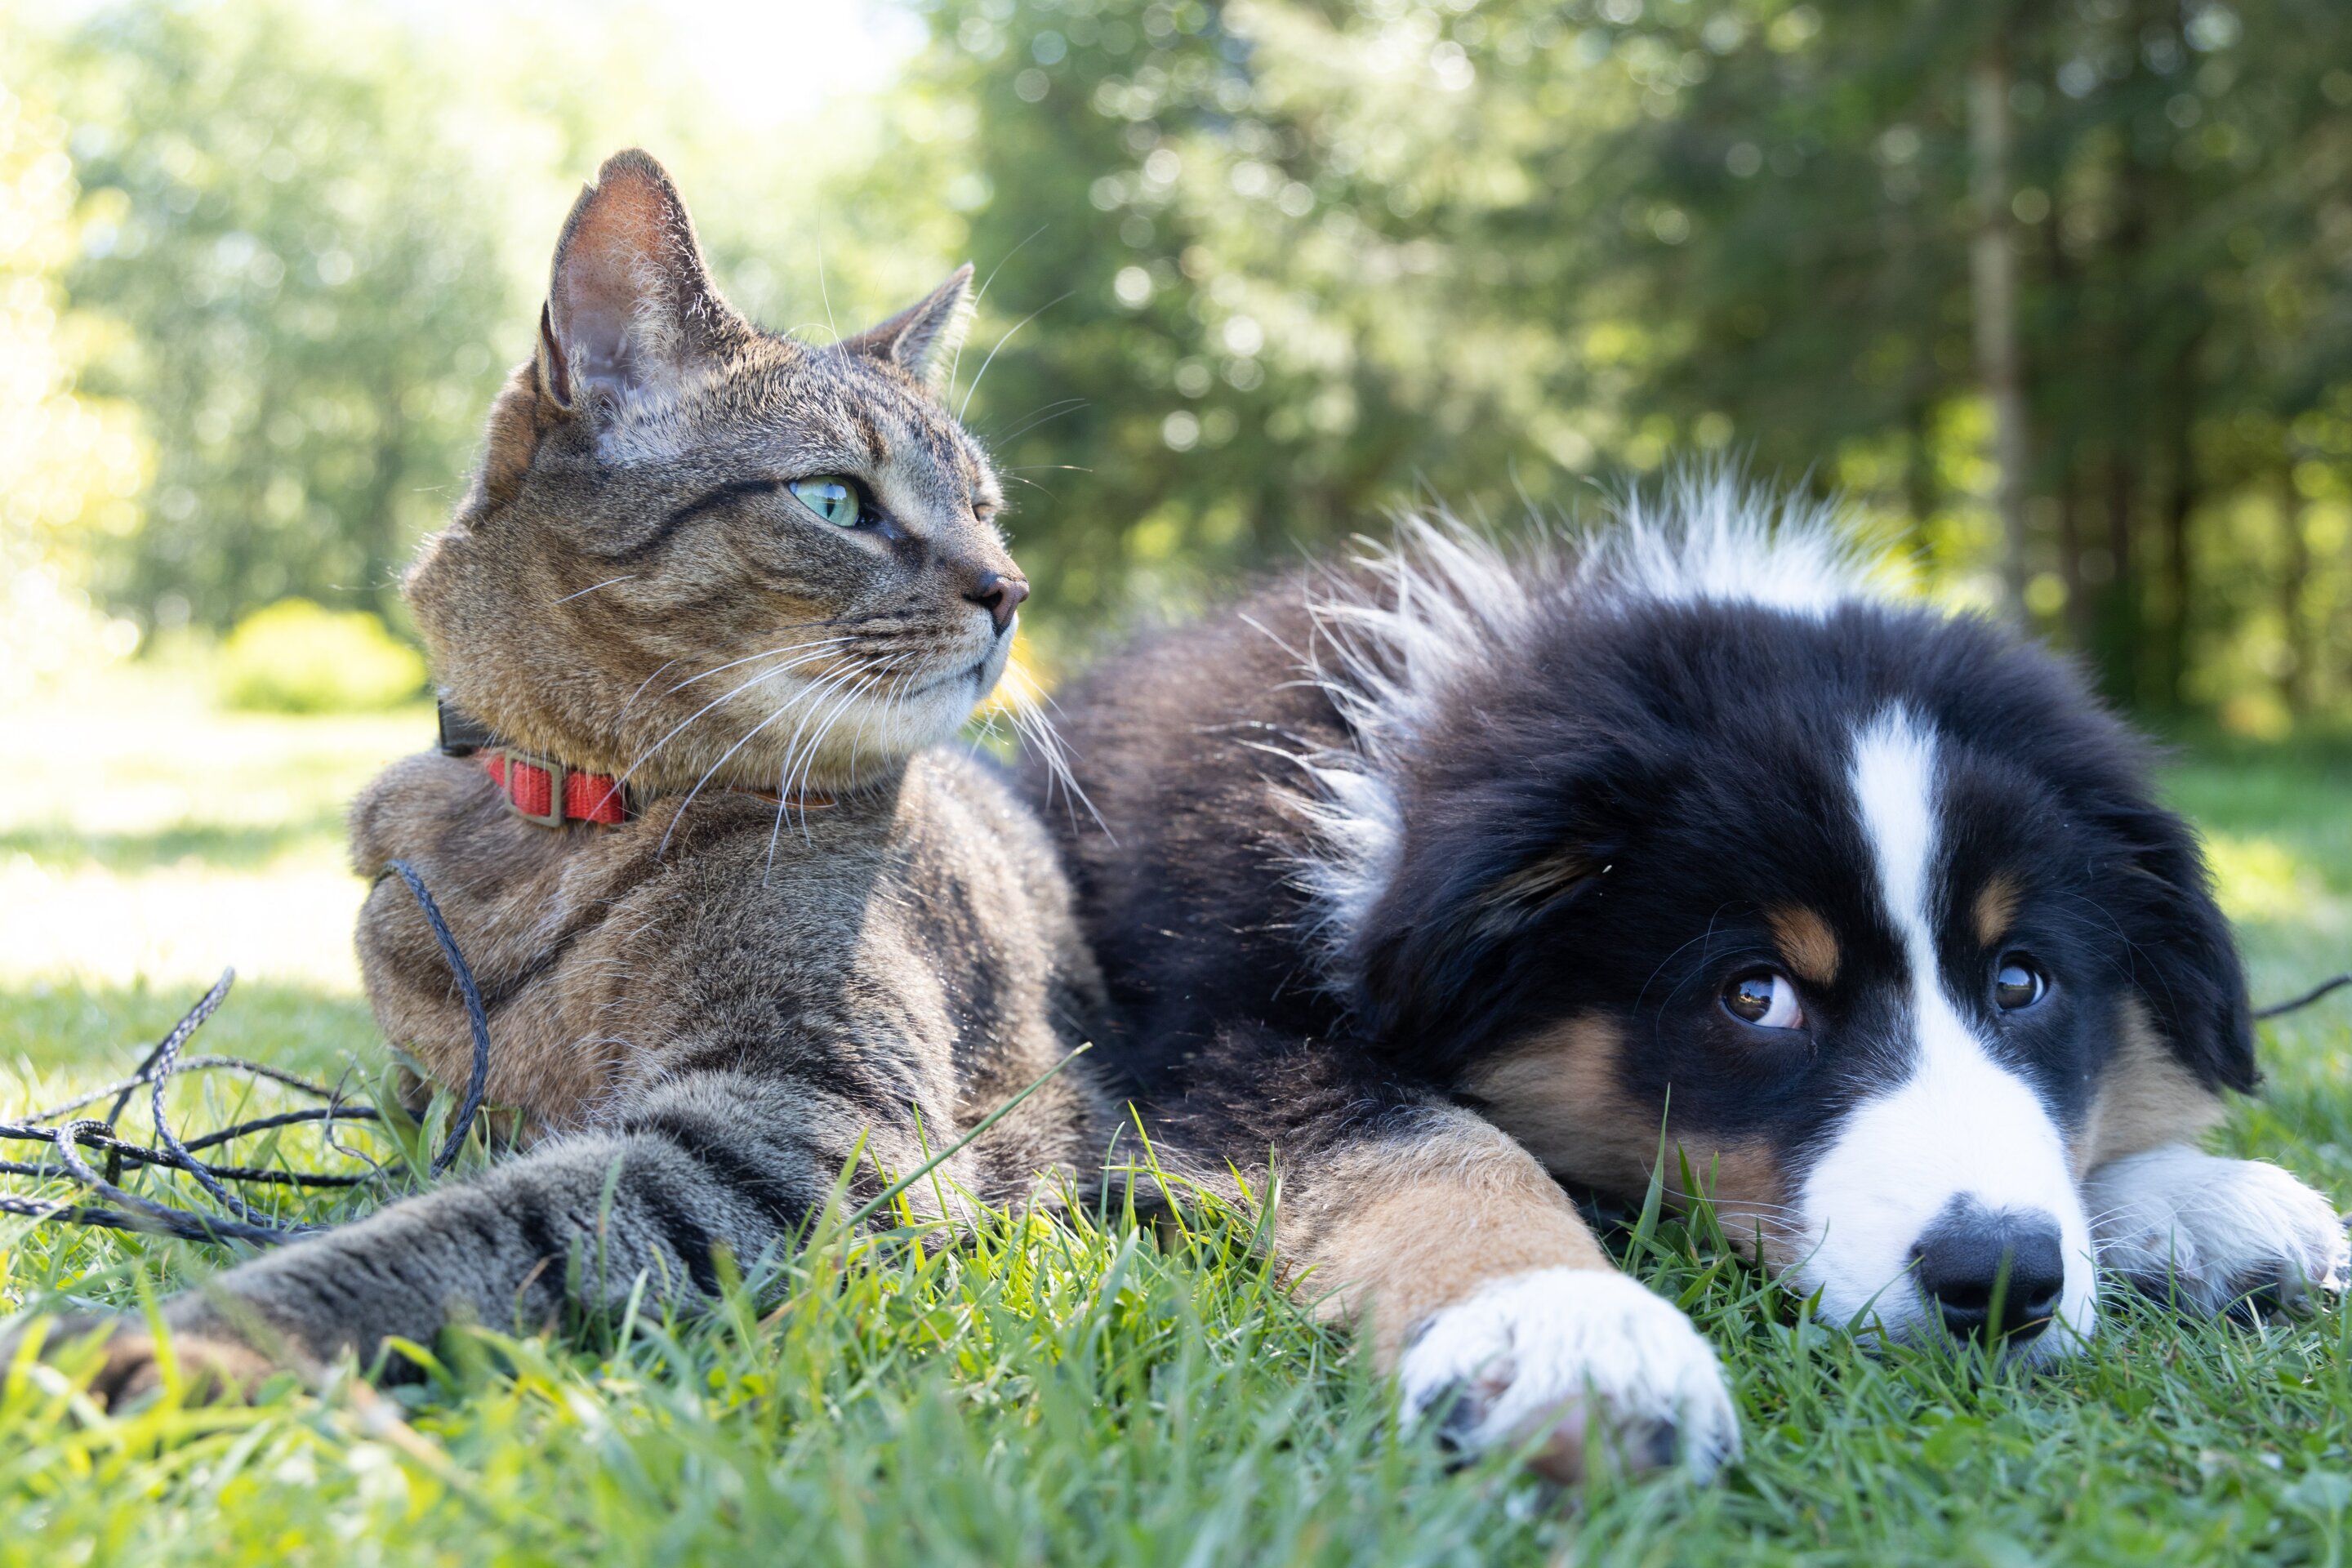 Multi-drug resistant organisms can be transmitted between healthy dogs and cats and their hospitalised owners - current events in healthcare 2022 - Health - Public News Time